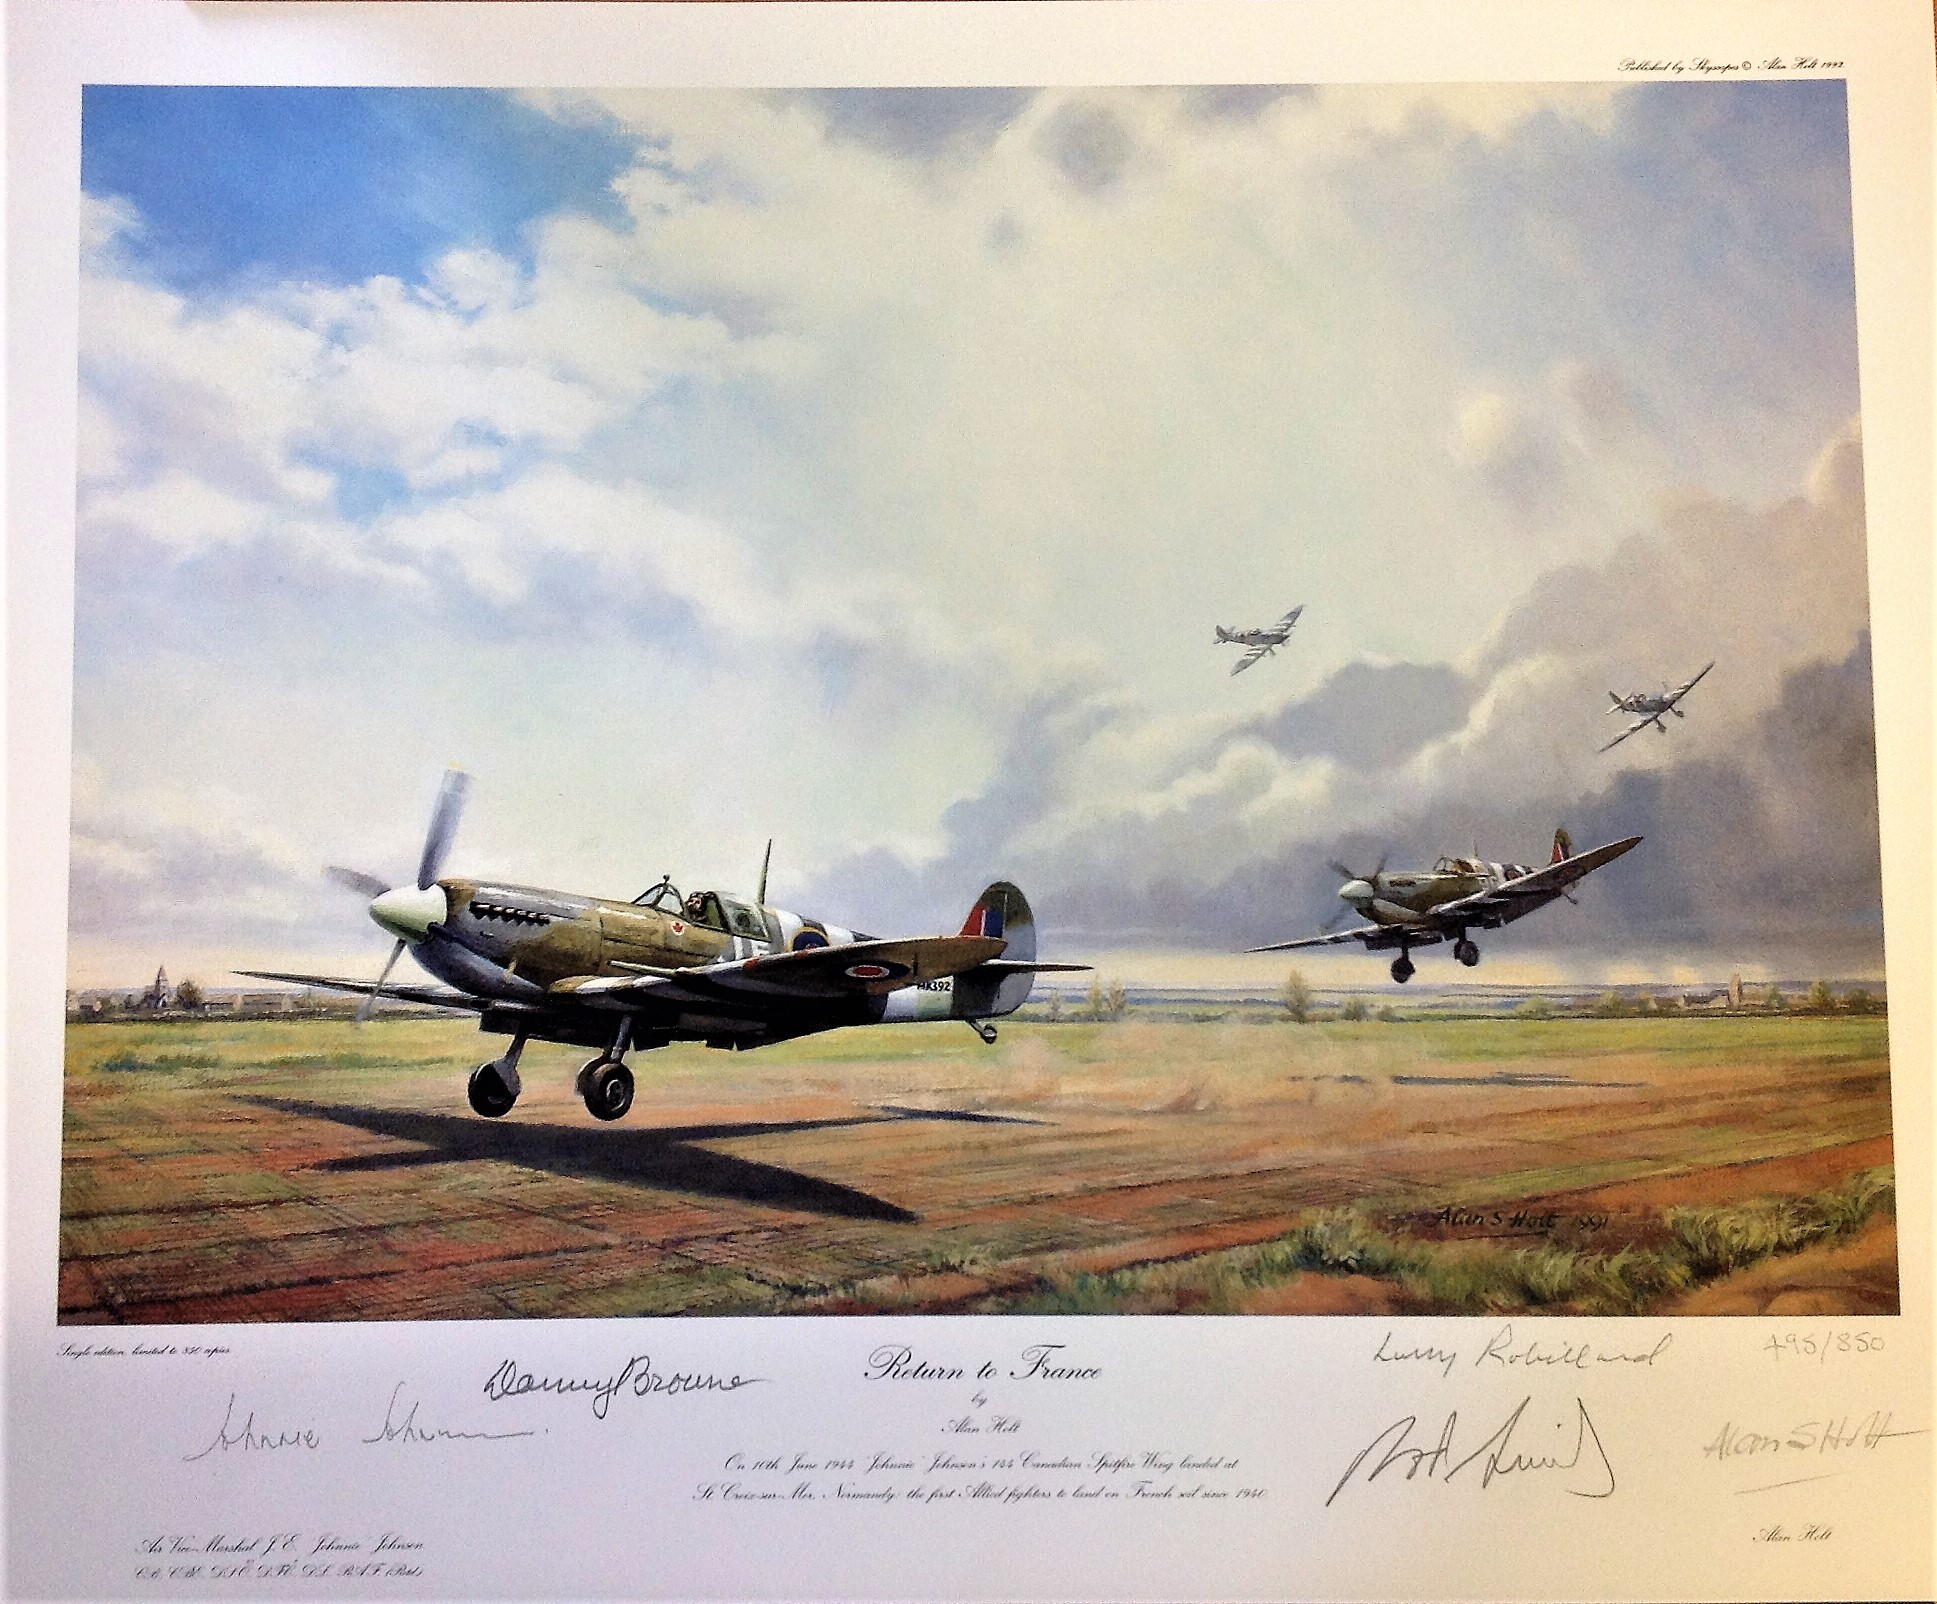 World War two print approx 22x17 titled Return to France by the artist Alan Holt signed in pencil by